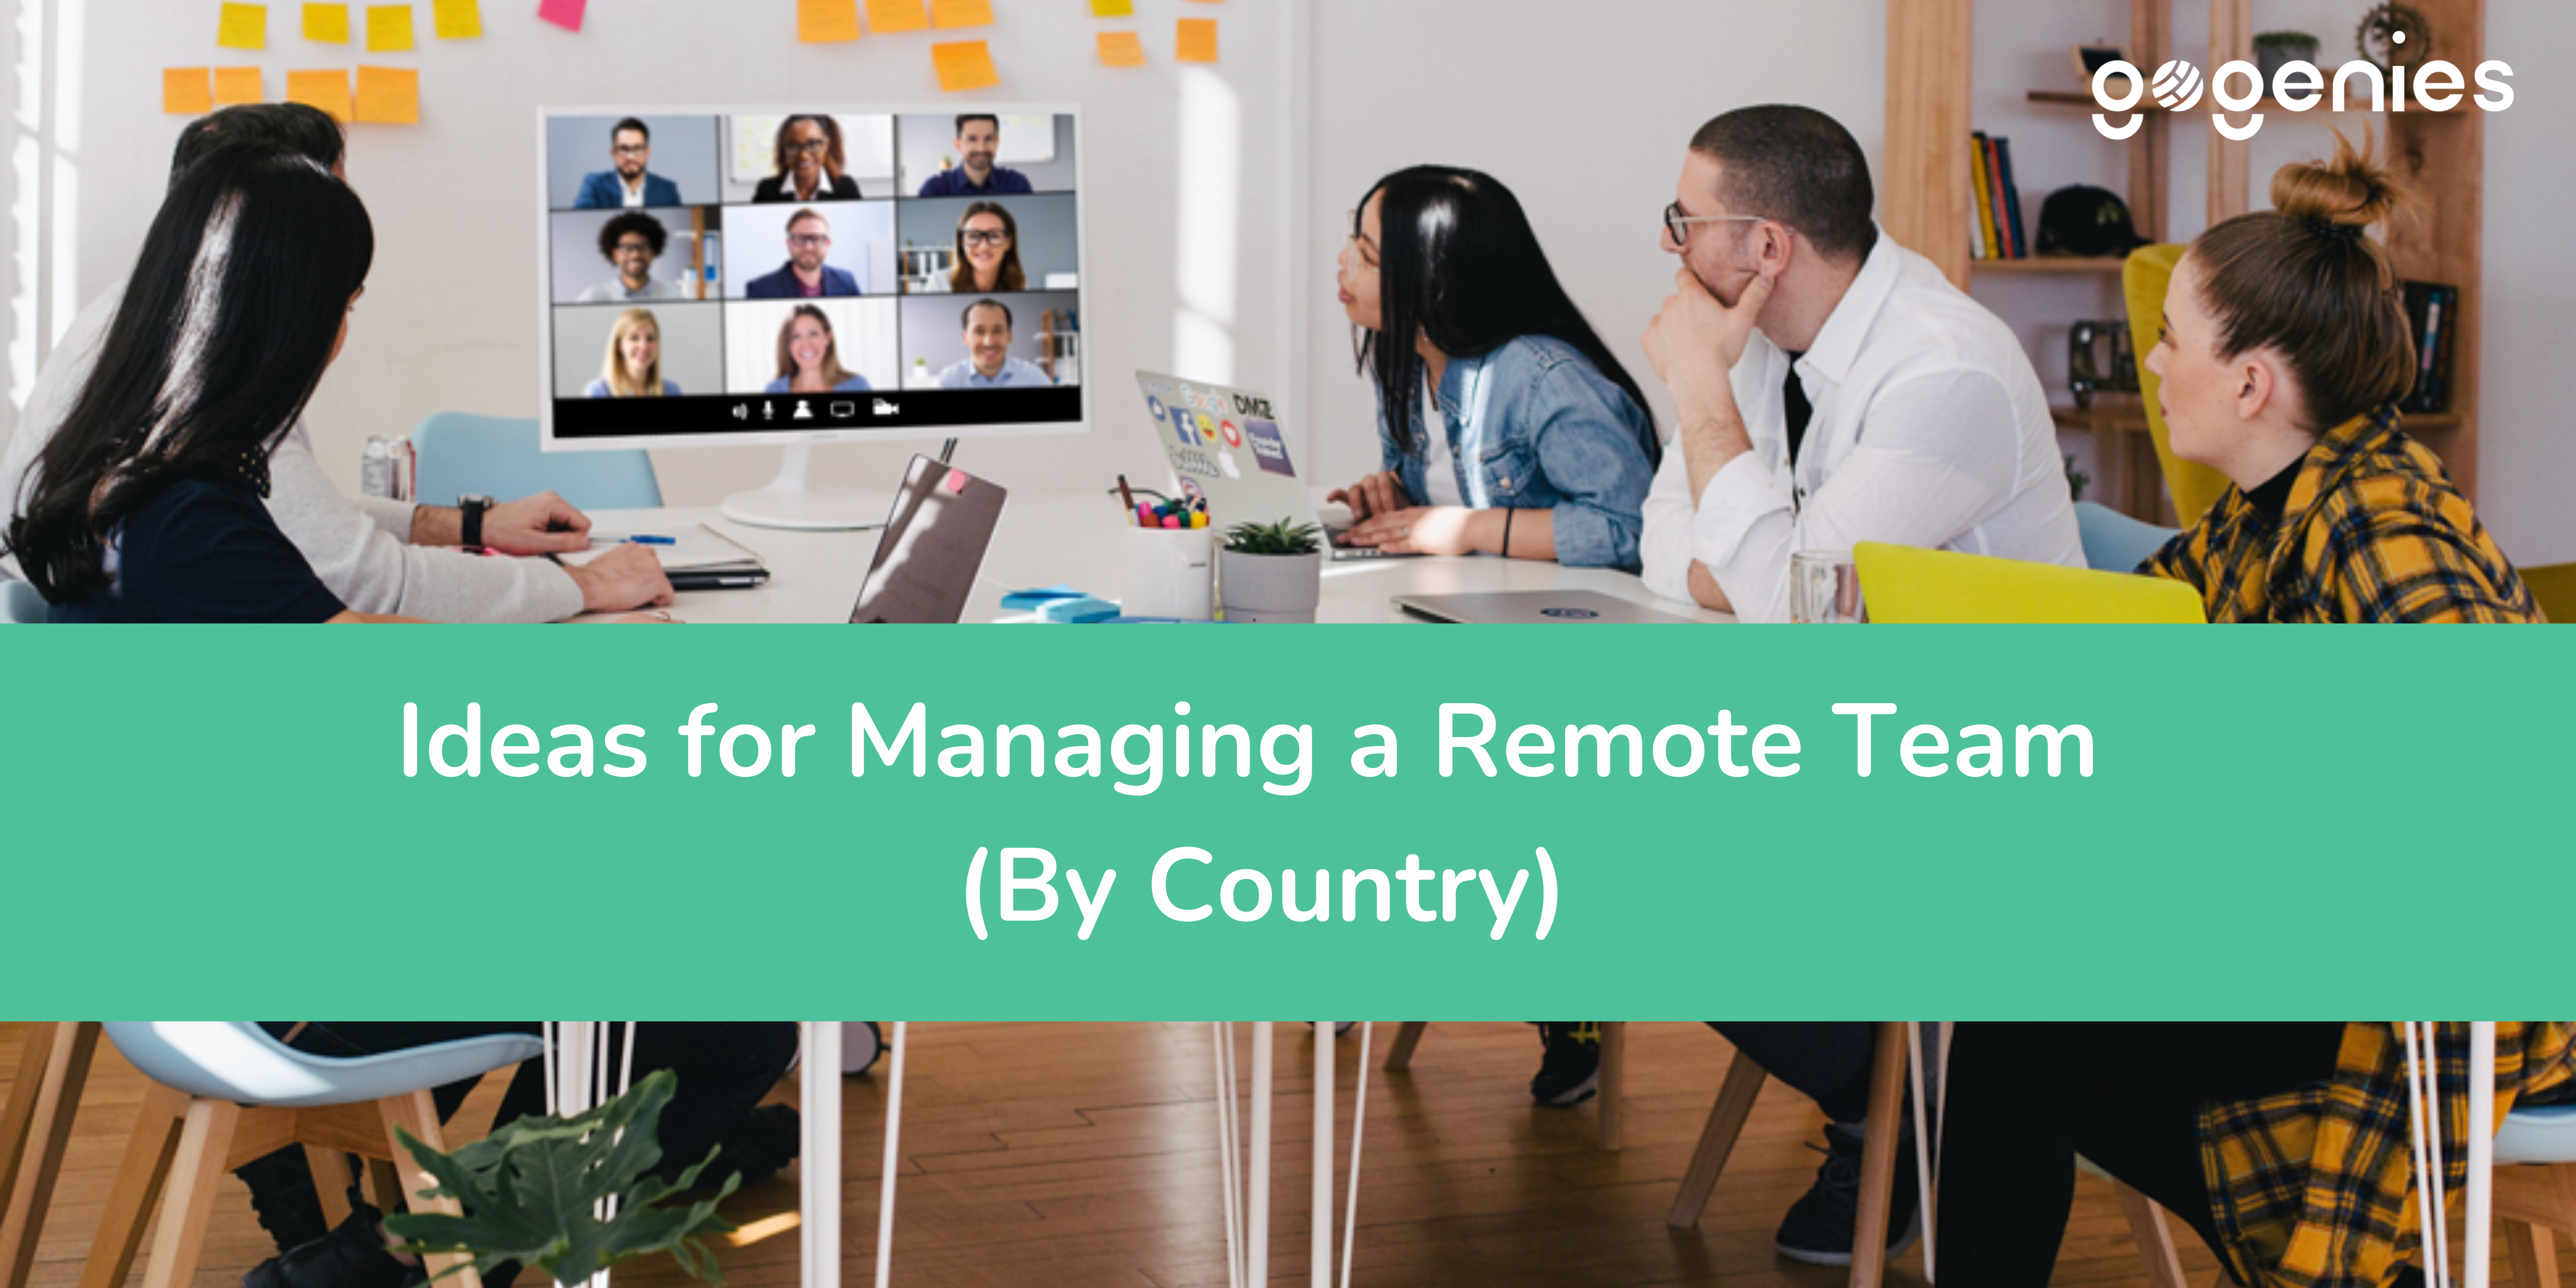 A group of employees attending a steam meeting online with remote team members